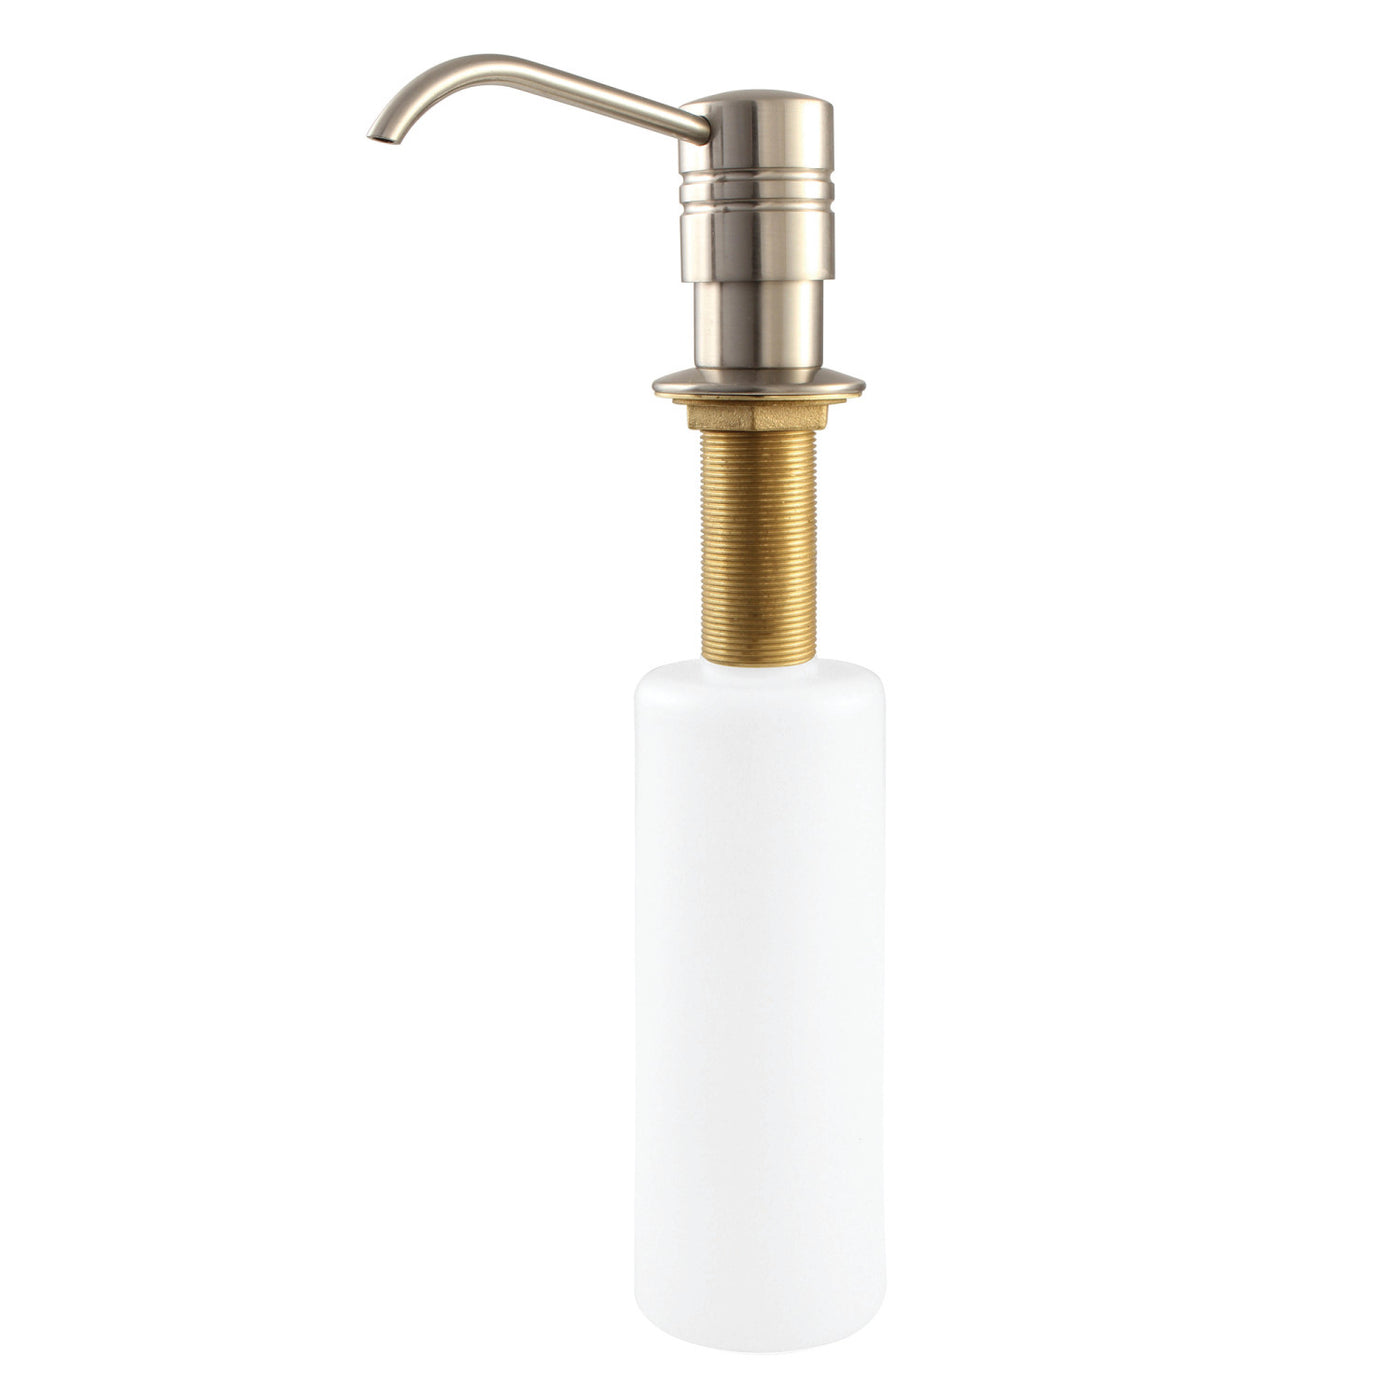 Elements of Design ESD2618 Straight Nozzle Metal Soap Dispenser, Brushed Nickel